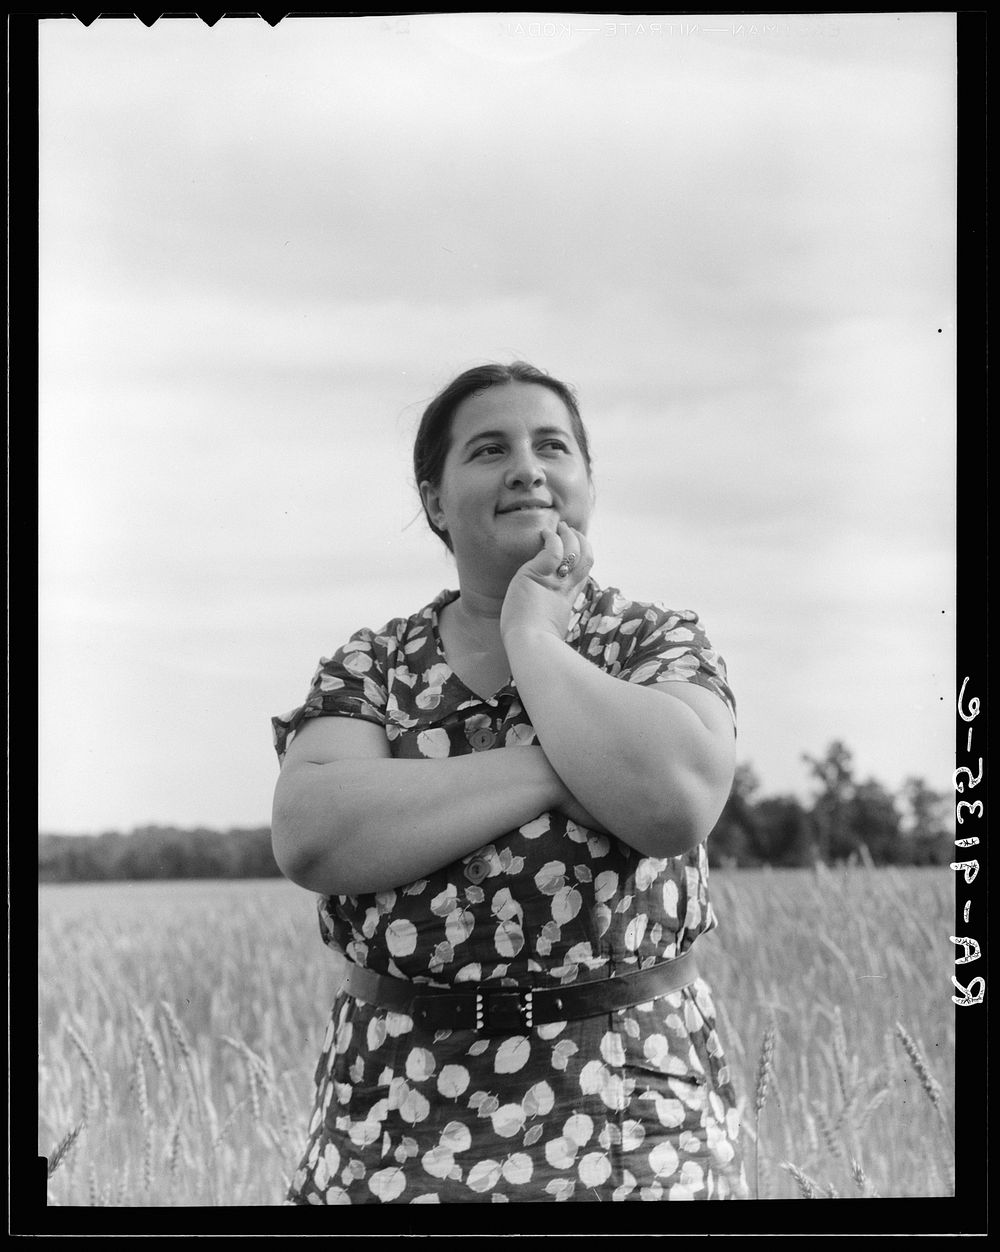 Hightstown, New Jersey. Jewish-American farm mother, Mrs. Cohen, wife of the farm manager by Dorothea Lange